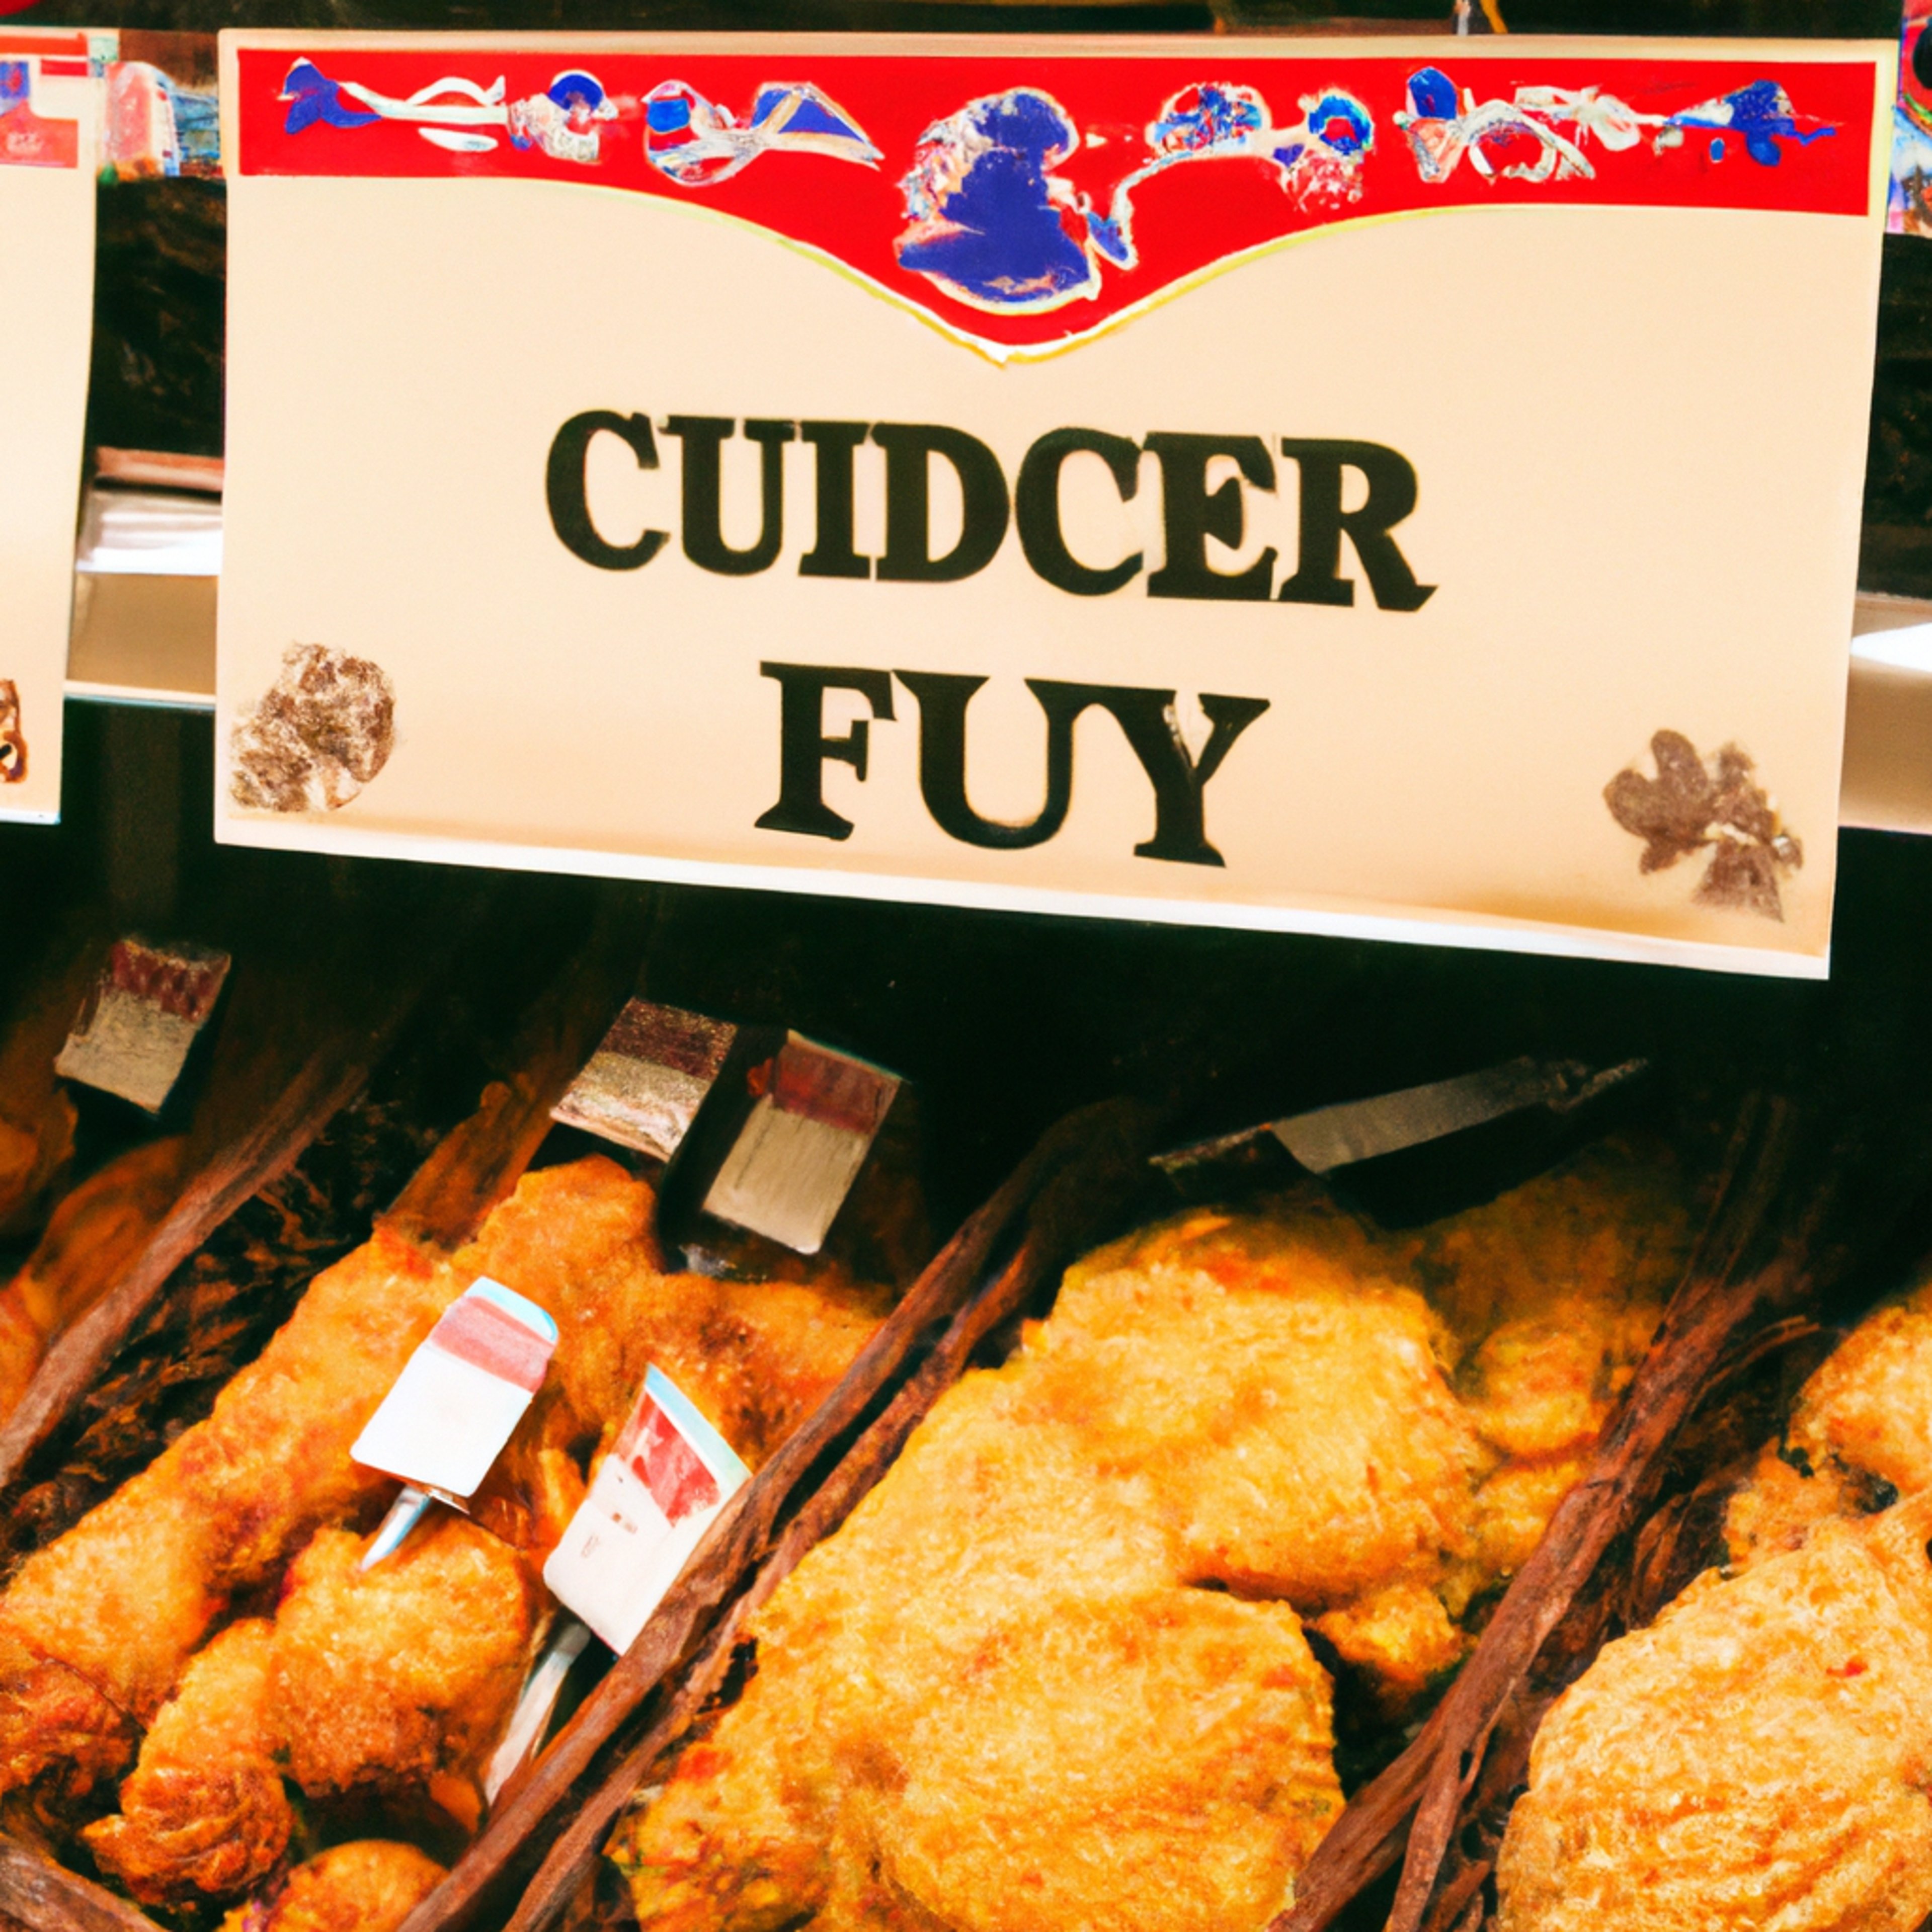 "Lucky Supermarket's Fried Chicken Reigns Supreme Among Grocery Store Options"